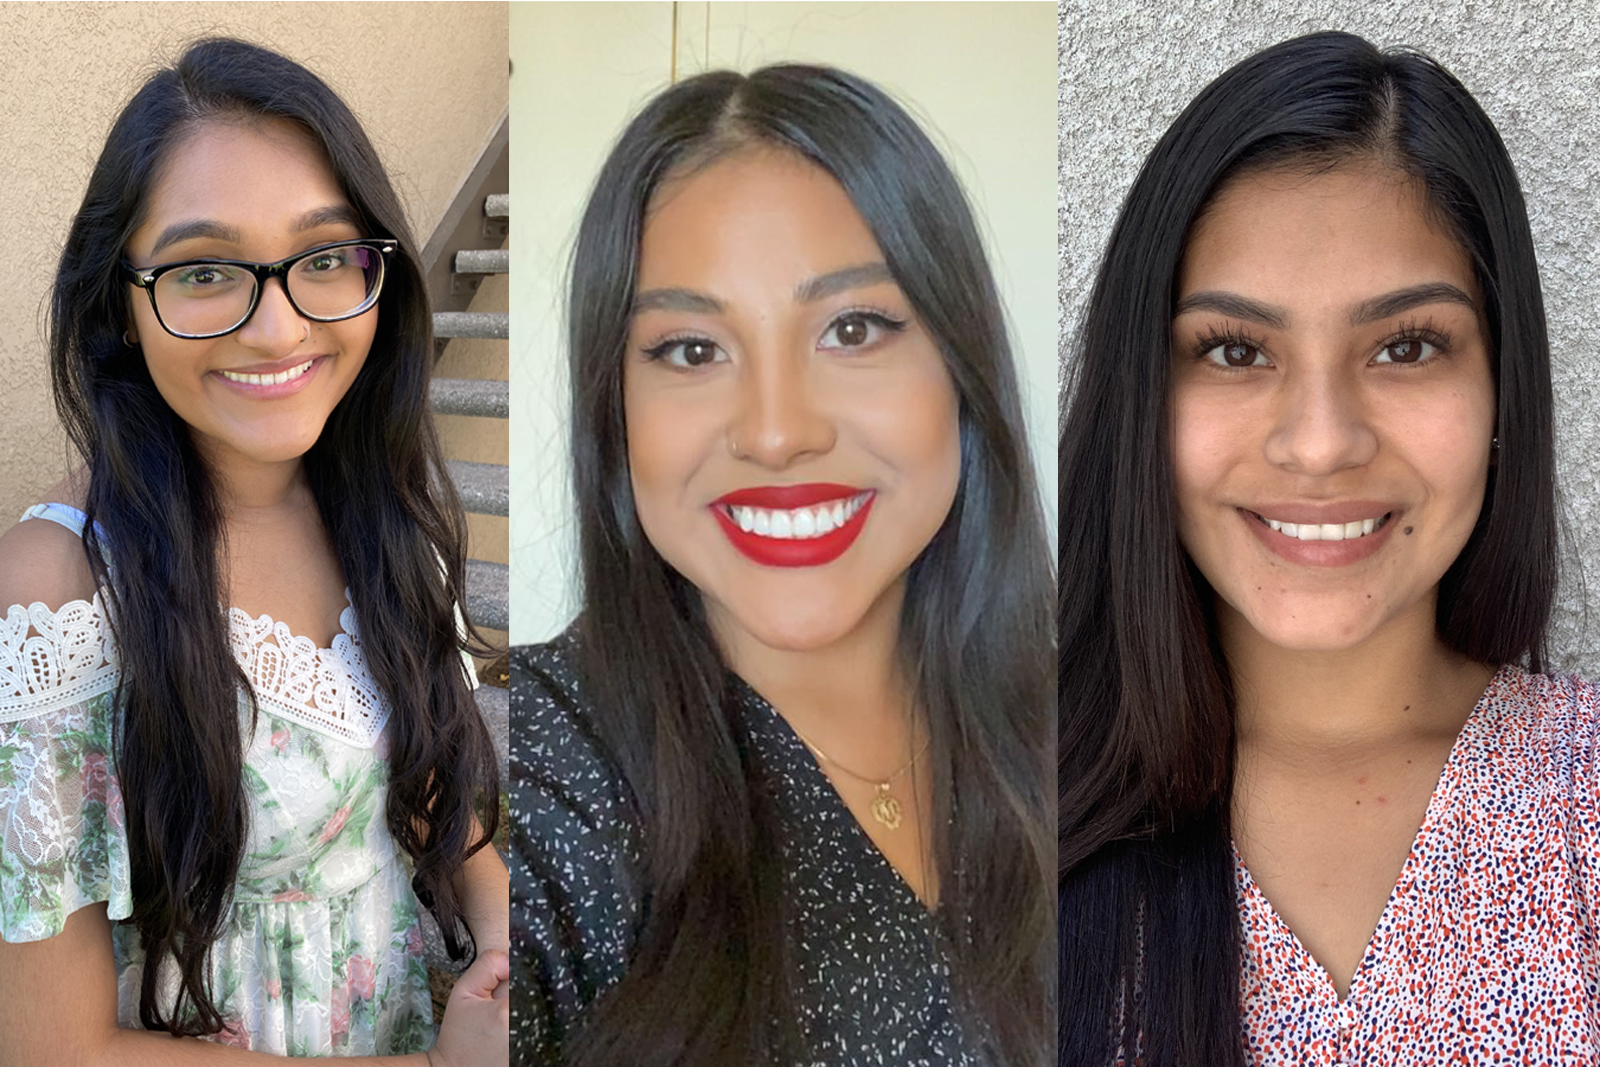 A photo of seniors who are part of the first cohort of labor studies graduates. From left: Riya Patel, Mayte Ipatzi and Michelle Cervantes.